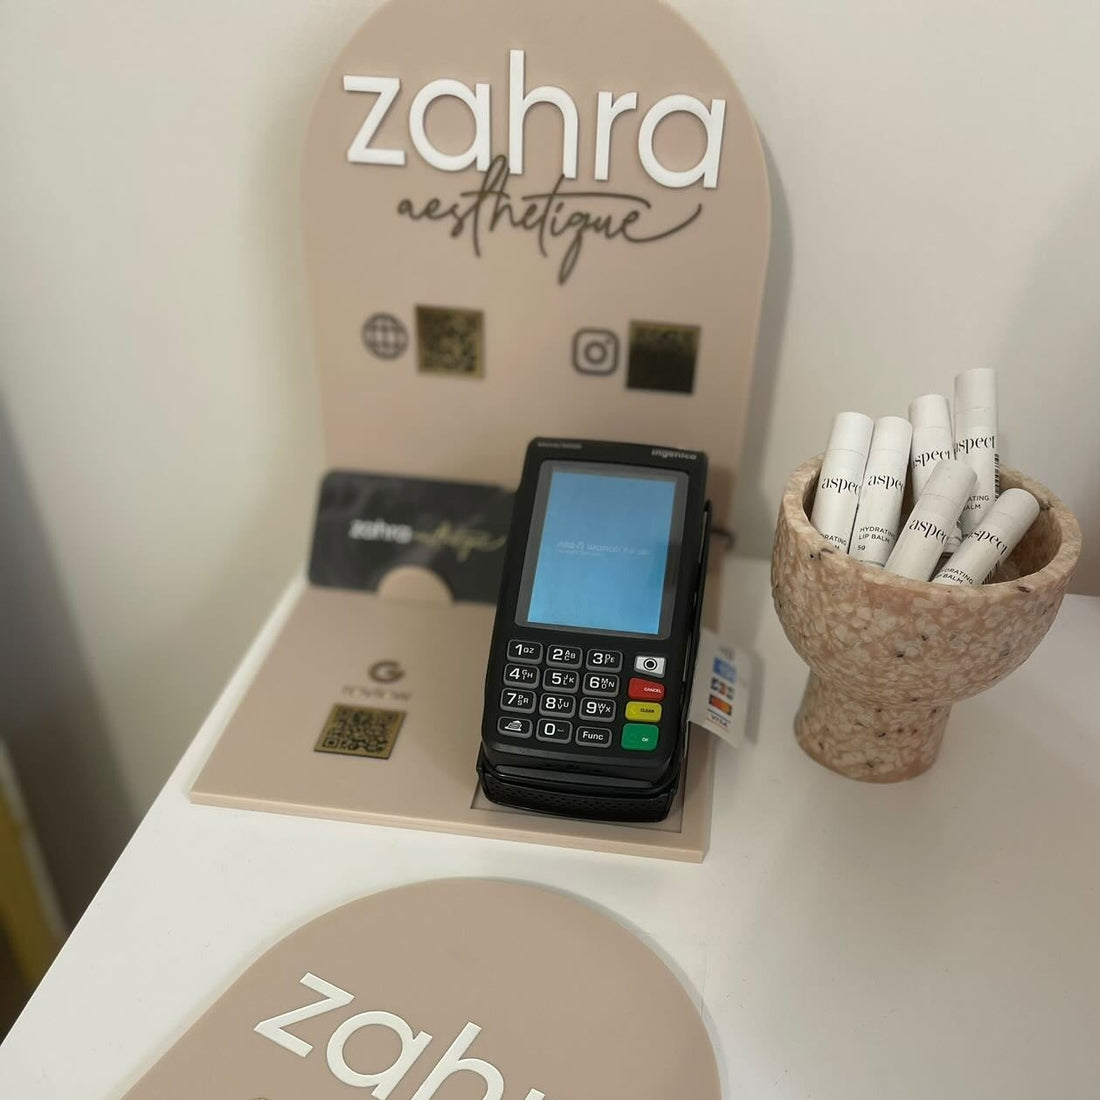 Eftpos Square Reader Dock Holder with Multi QR Codes and Logo, Arch Shaped Acrylic Sign